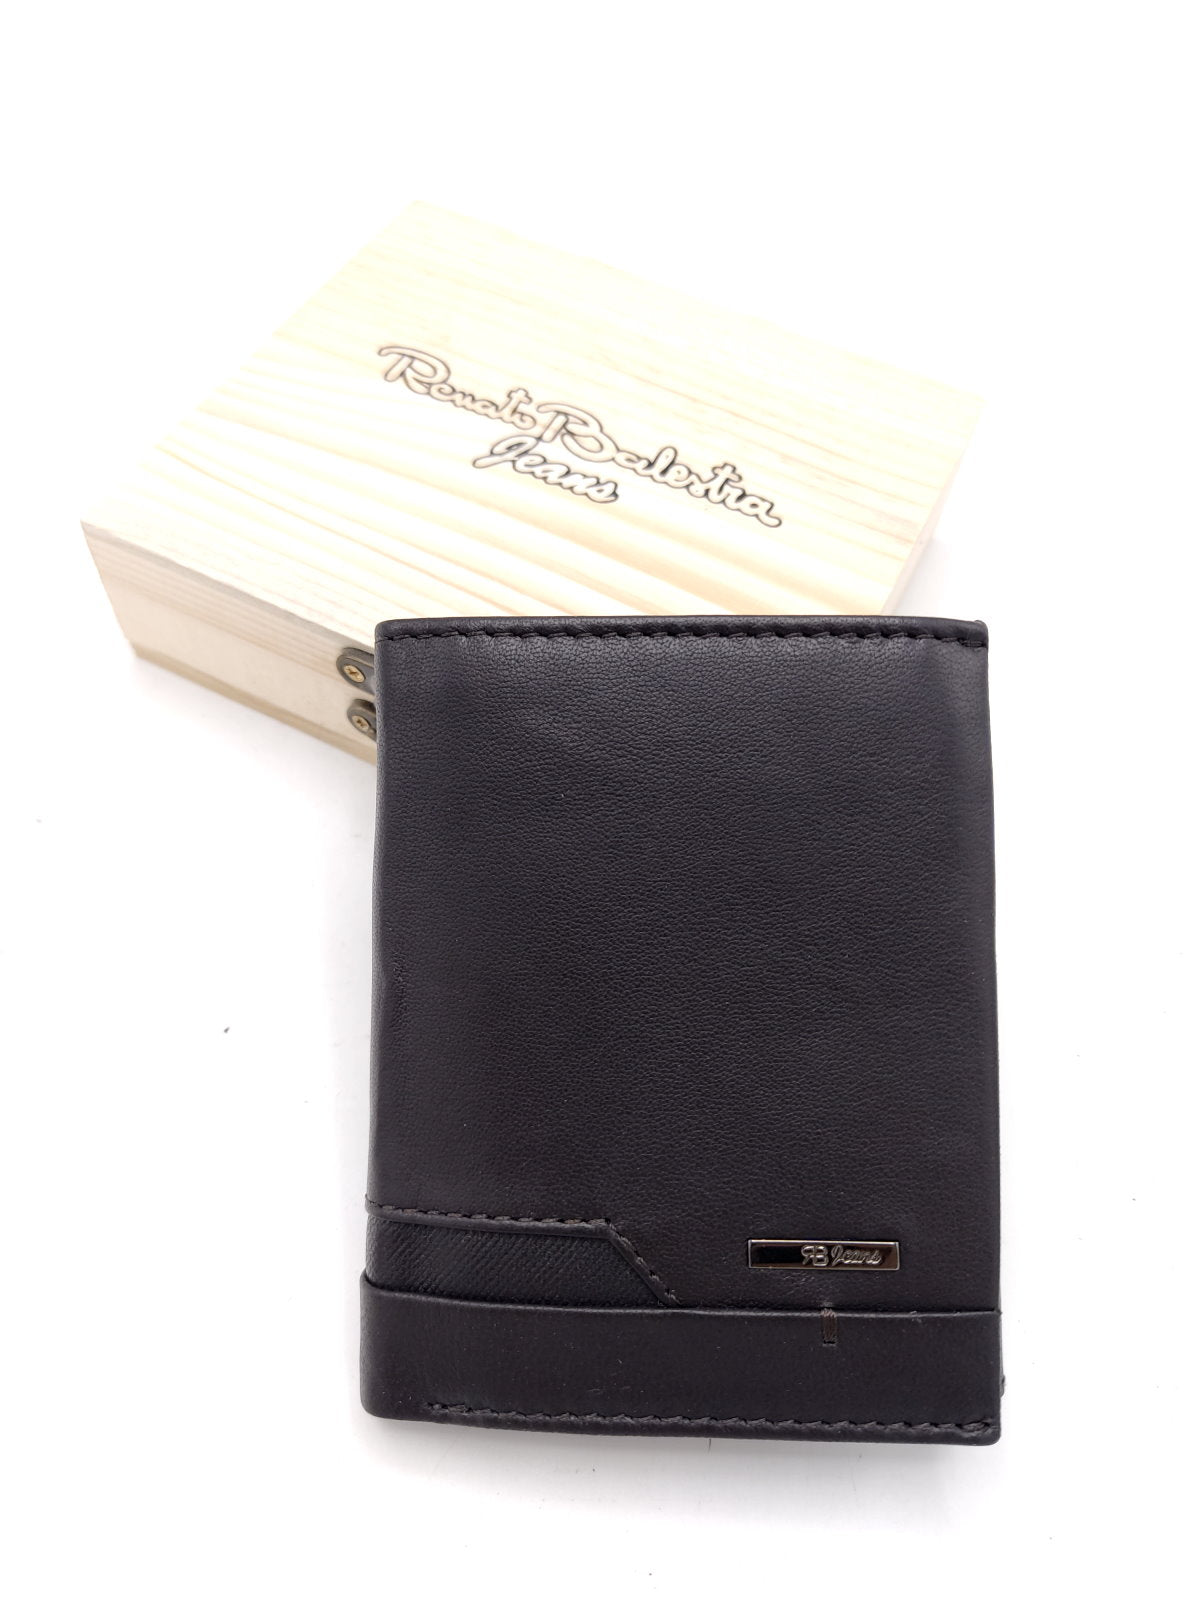 Genuine leather wallet for Men, Brand Renato Balestra Jeans, with wooden box, art. PDK166-65.425